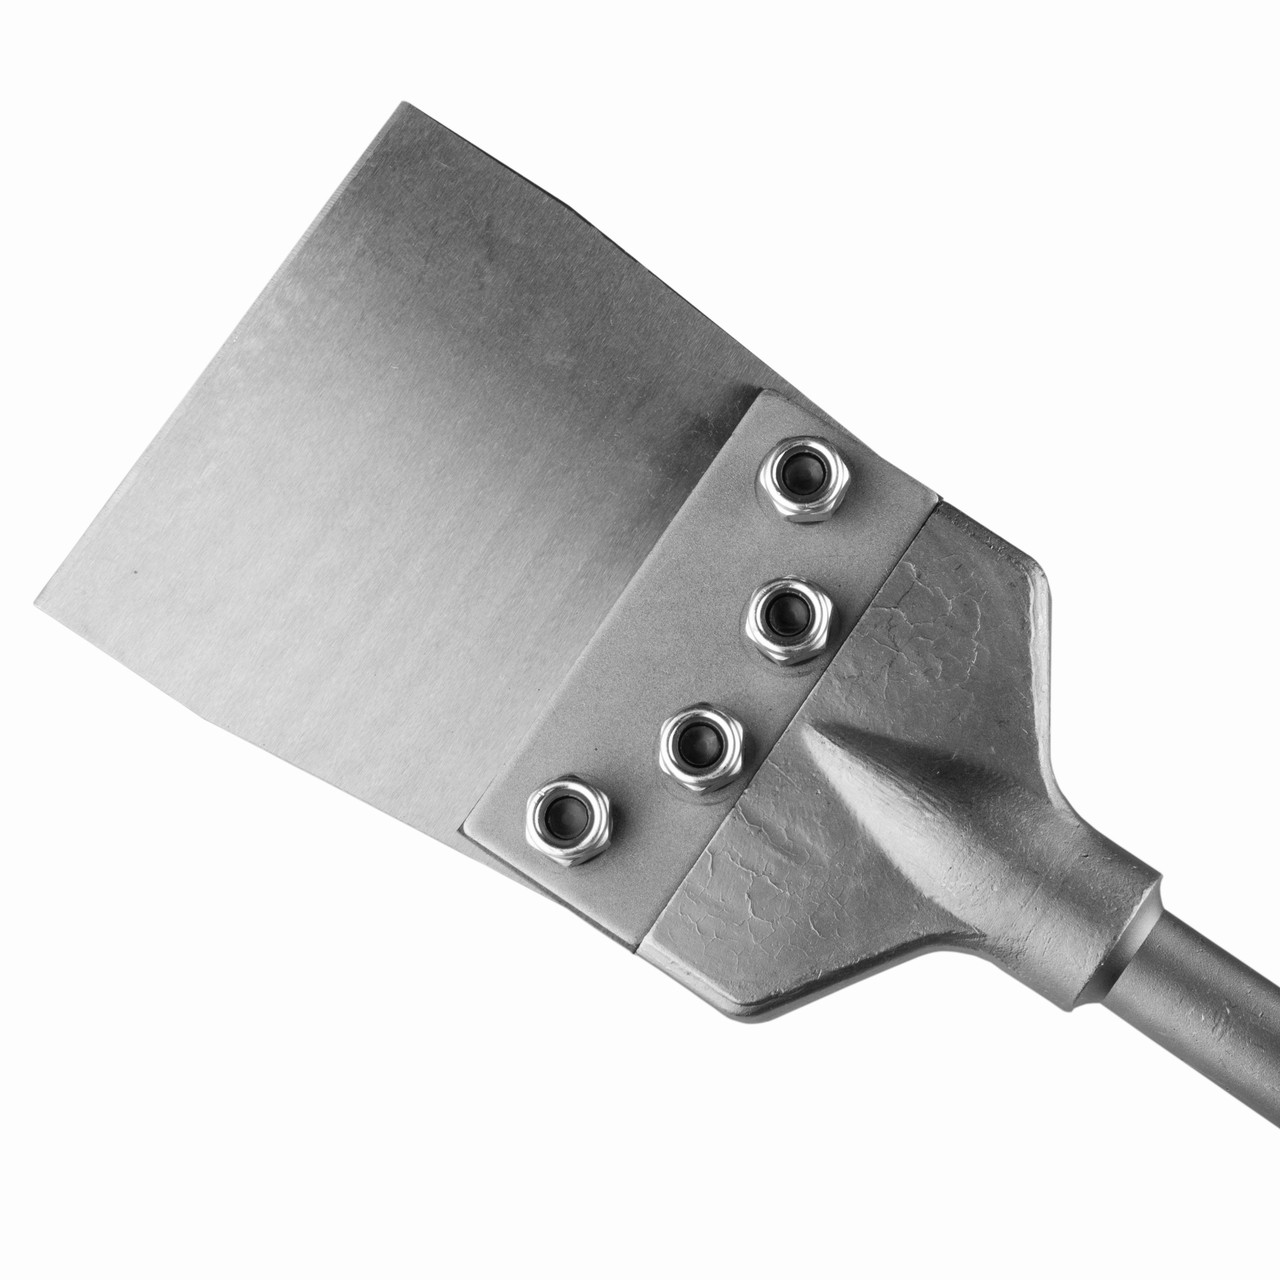 TR Industrial 6 in. x 25 in. Floor Scraper with Blade Chisel, Compatible with TR-Max and SDS Max